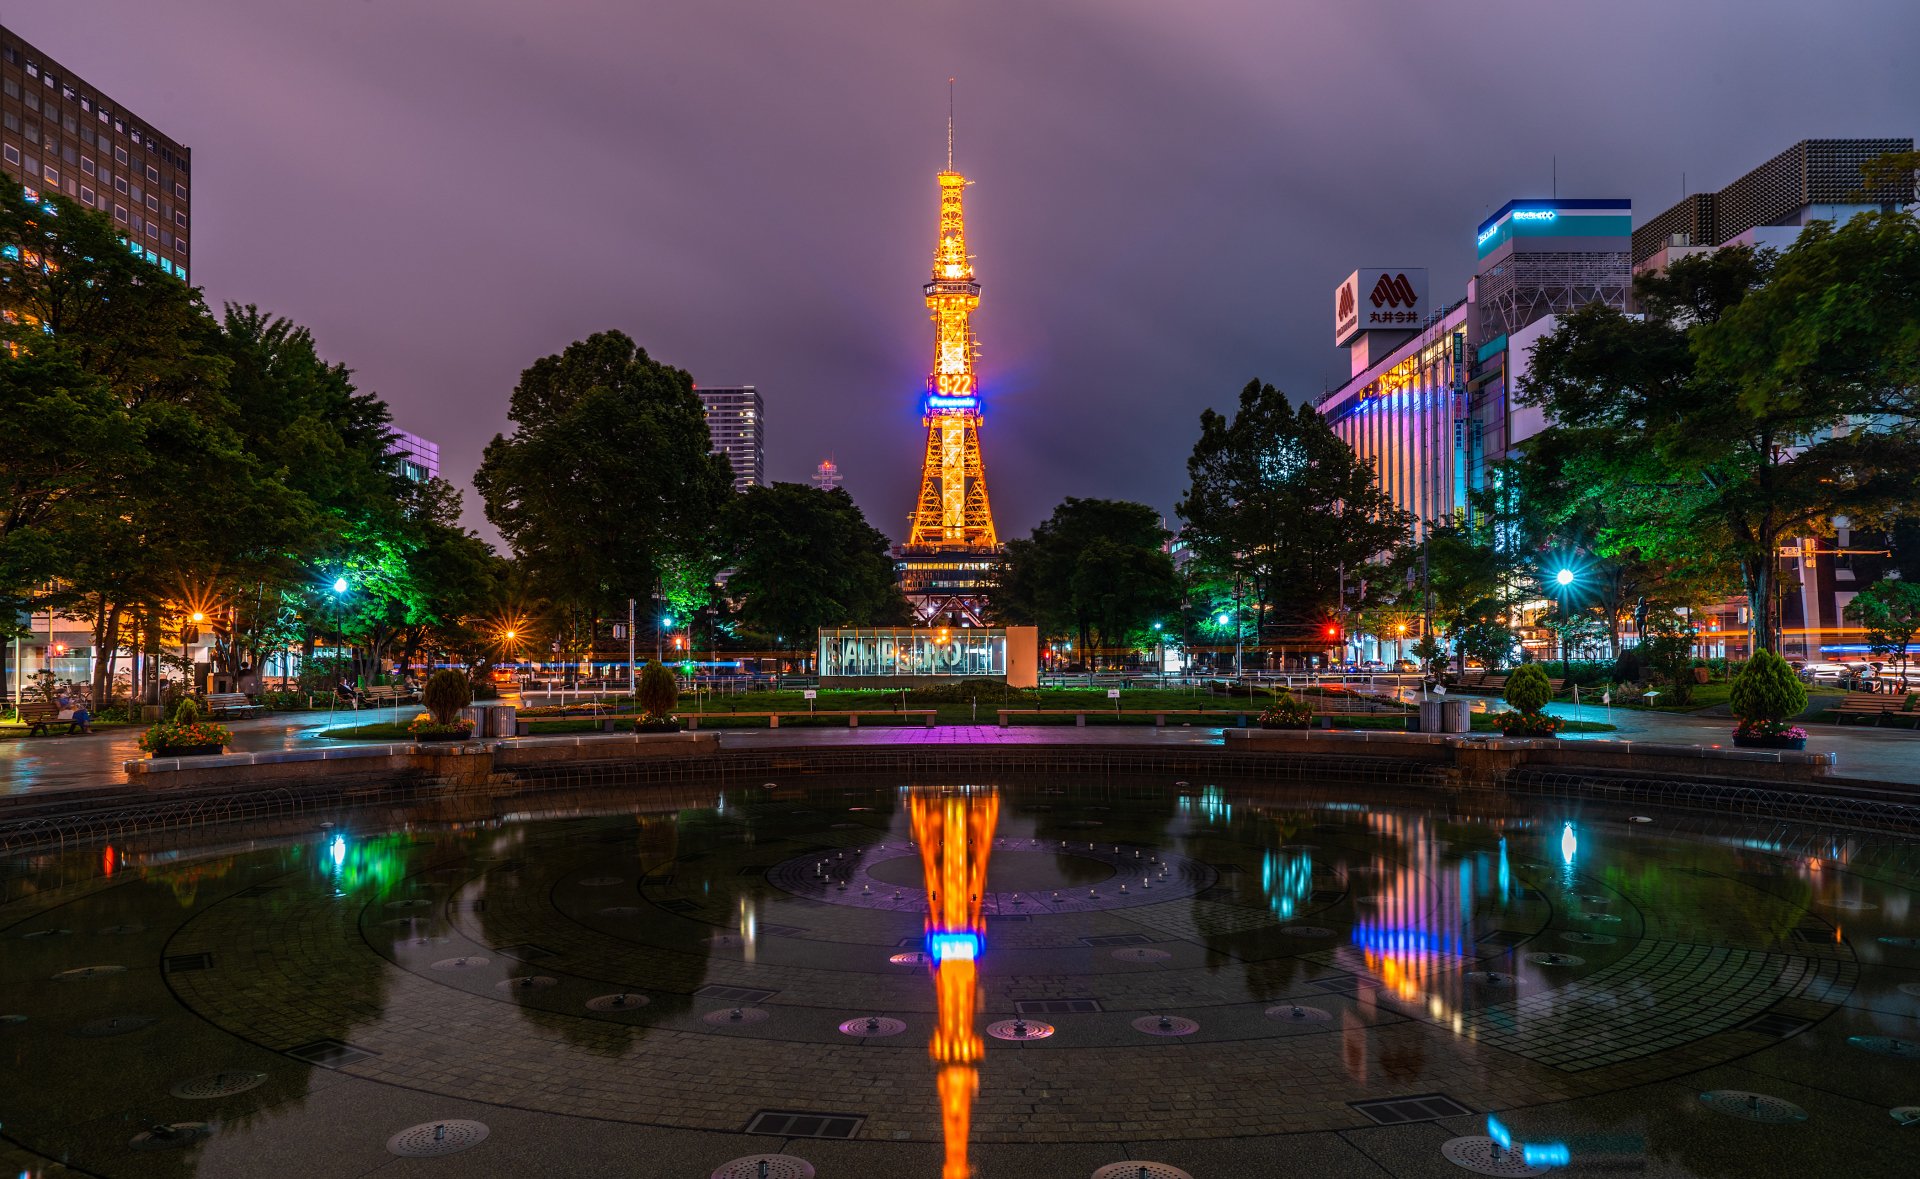 Sapporo, Japan lit up at Night